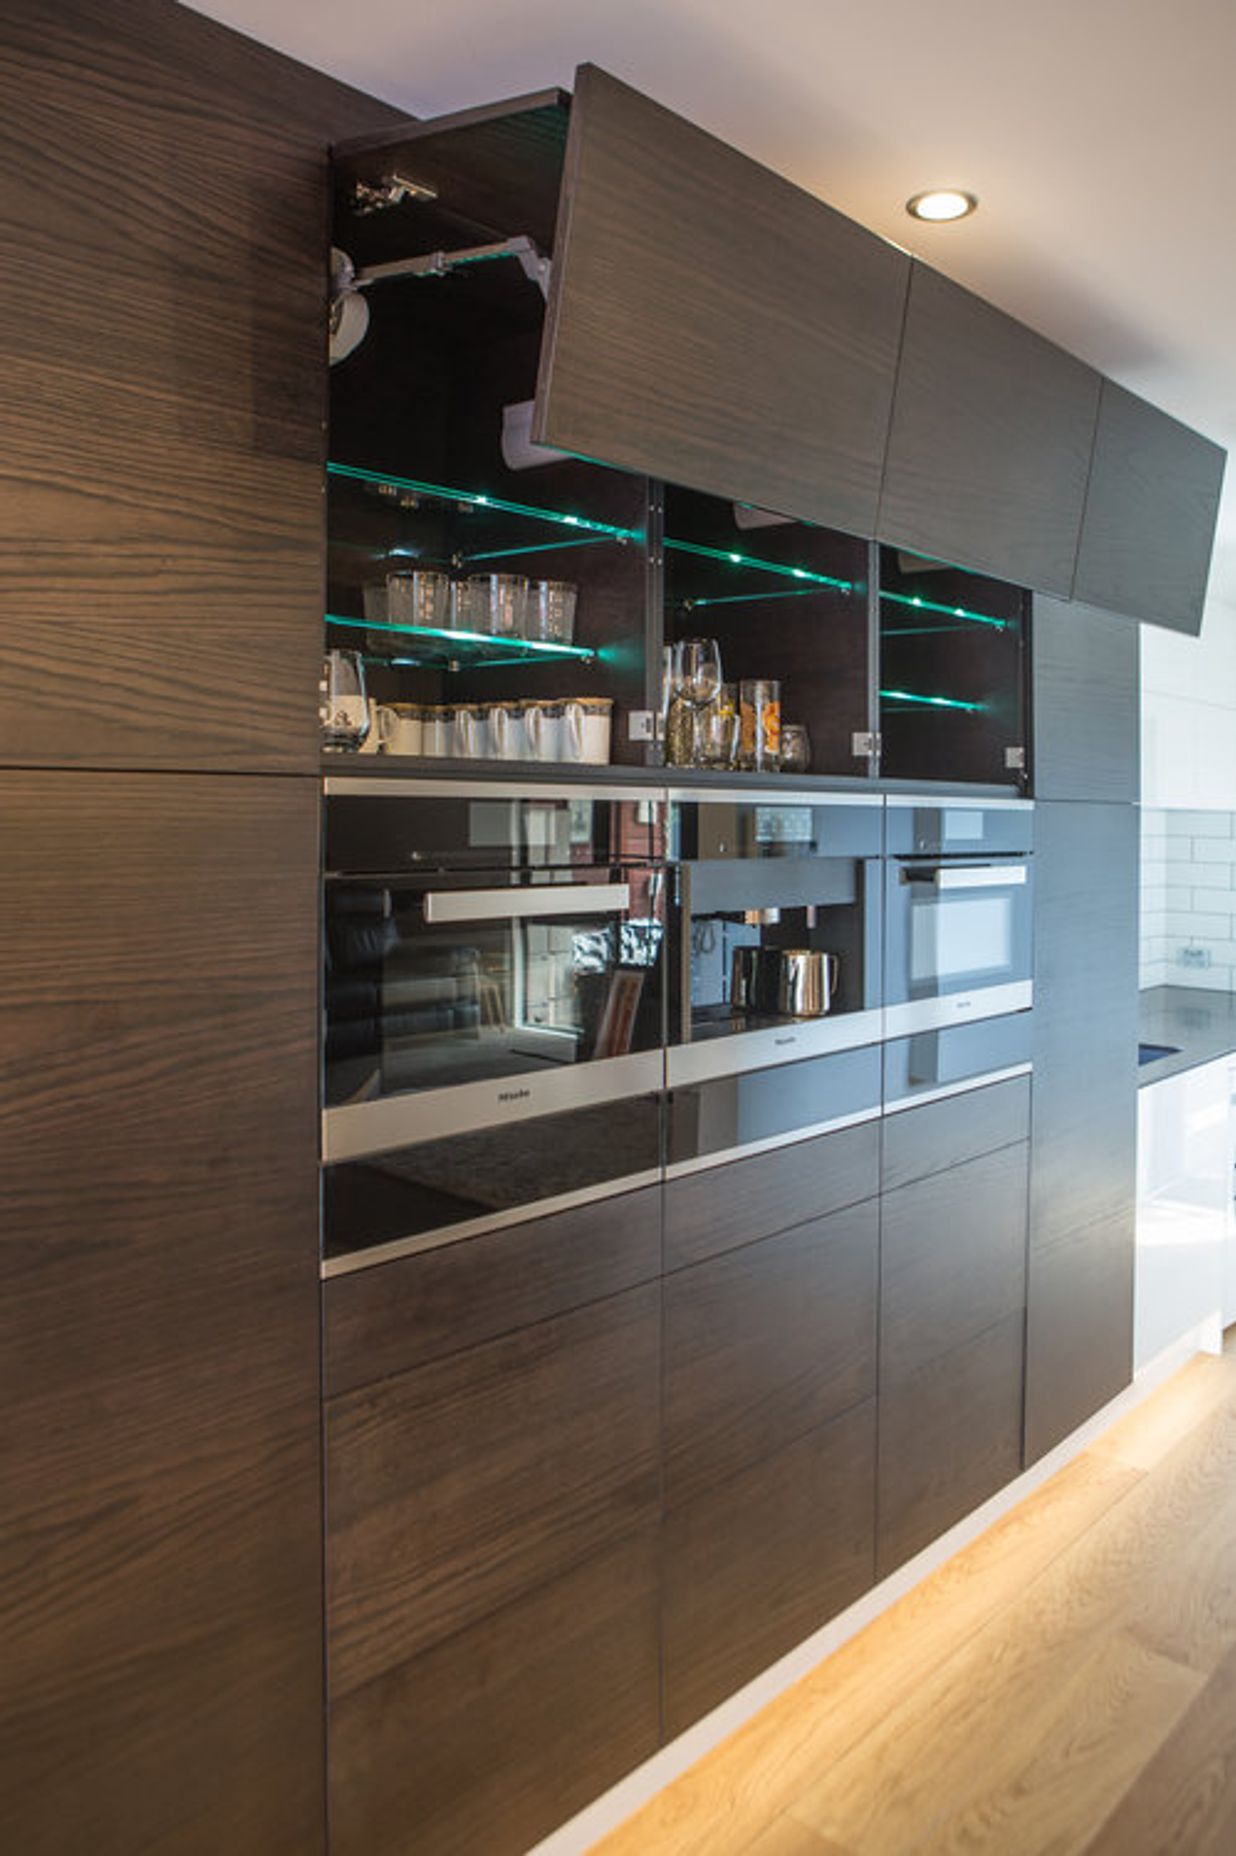 Blum Servo-drive hardware is used, and Miele appliances - steam oven, pyrolytic oven and built-in coffee machine.